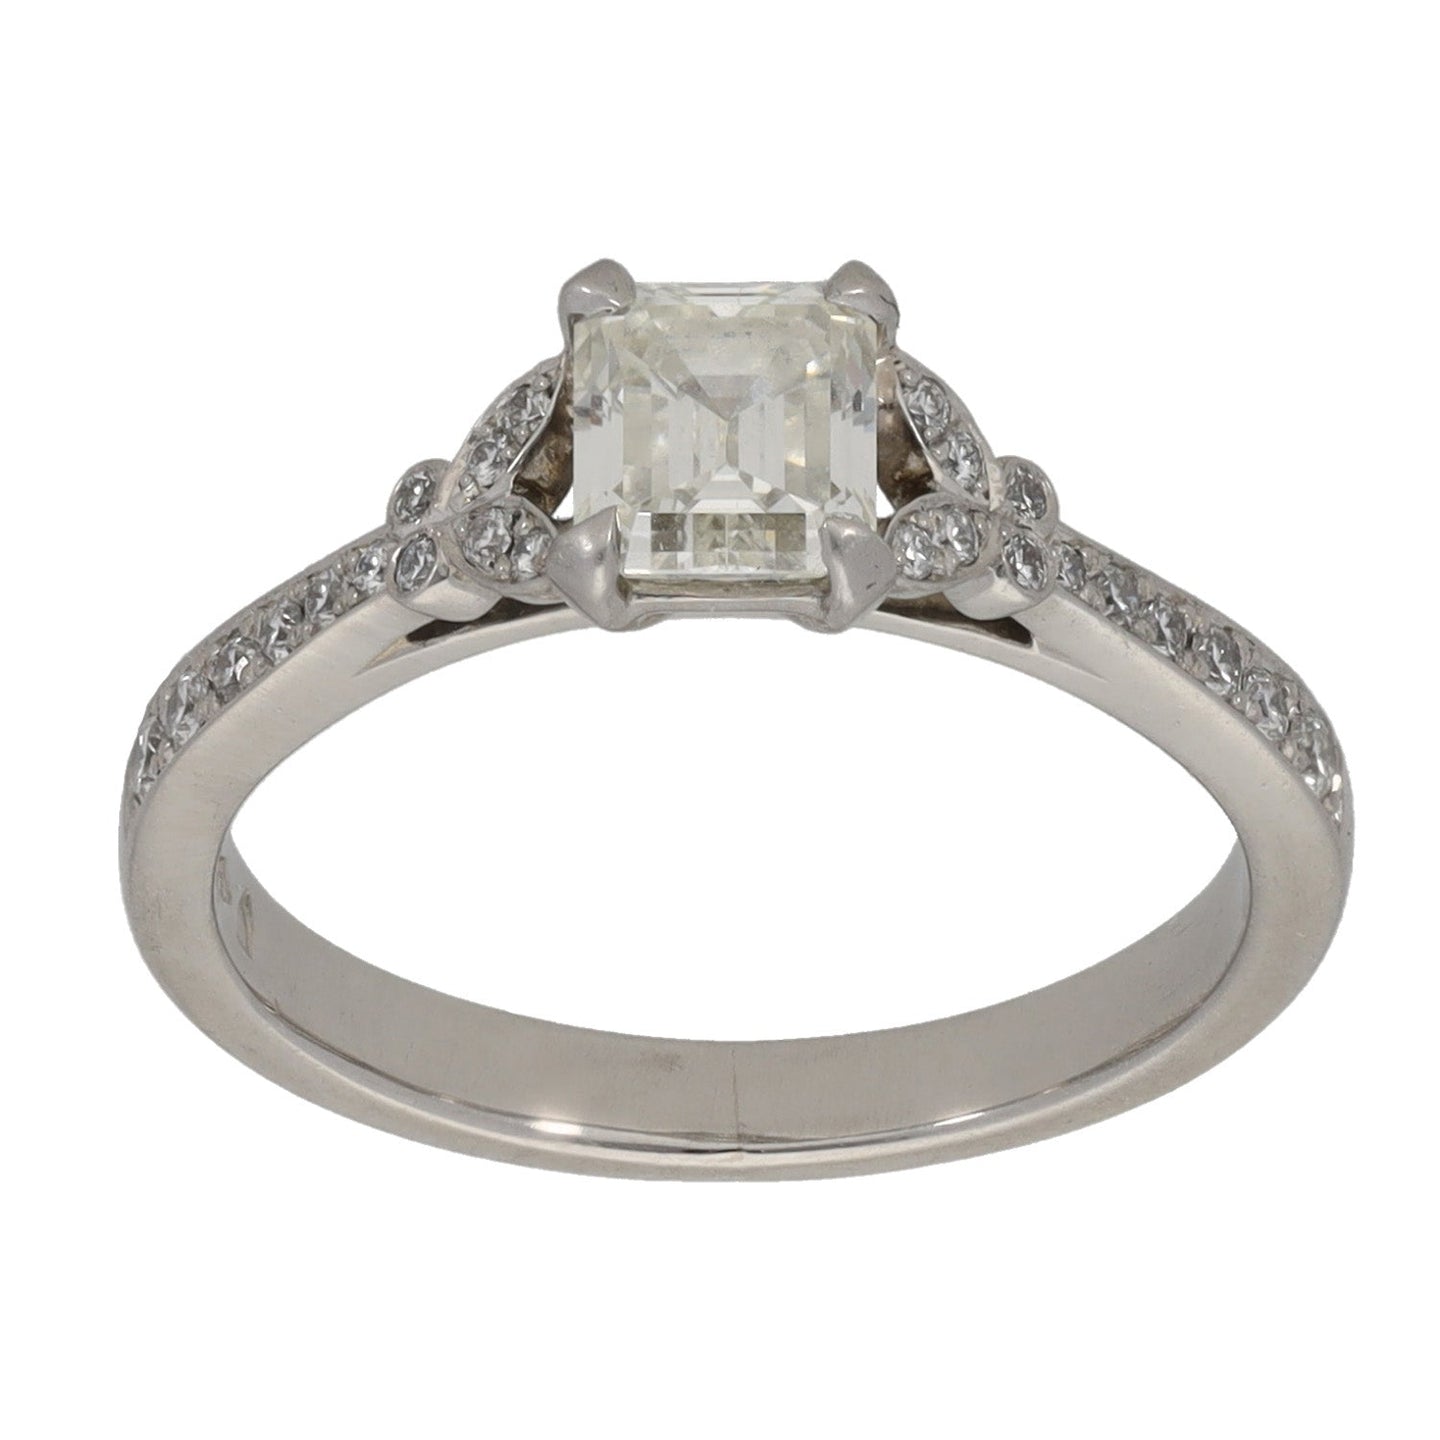 Platinum 0.91ct Diamond Solitaire Ring With Accent Stones Size K